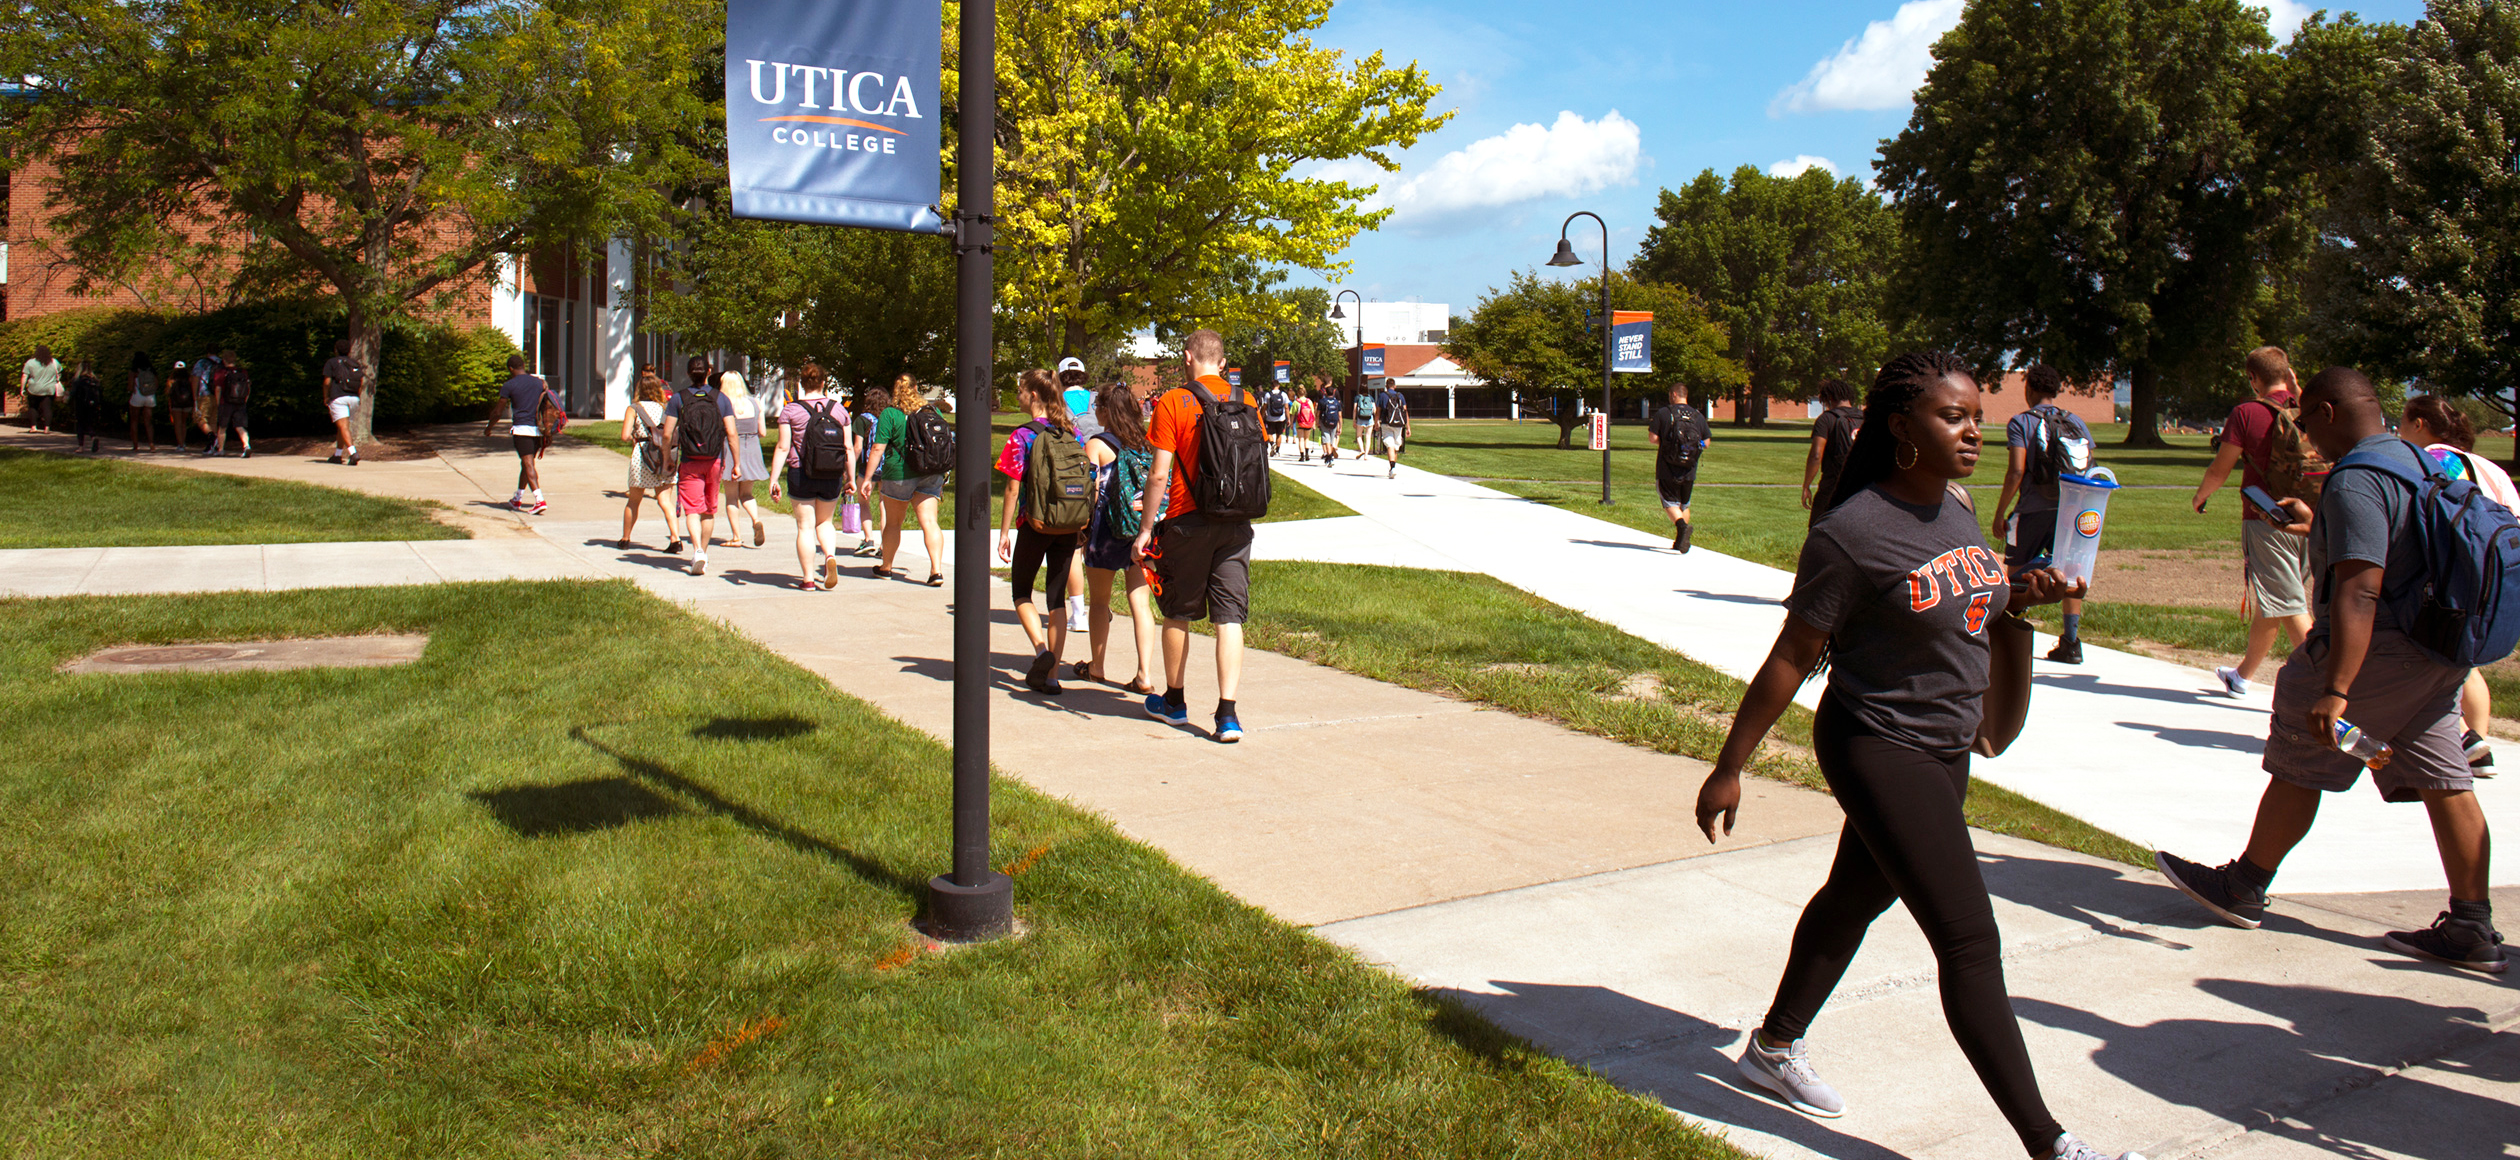 The Applied Ethics Institute at Utica University - Ethics & Public Policy Newsletter - September 2017